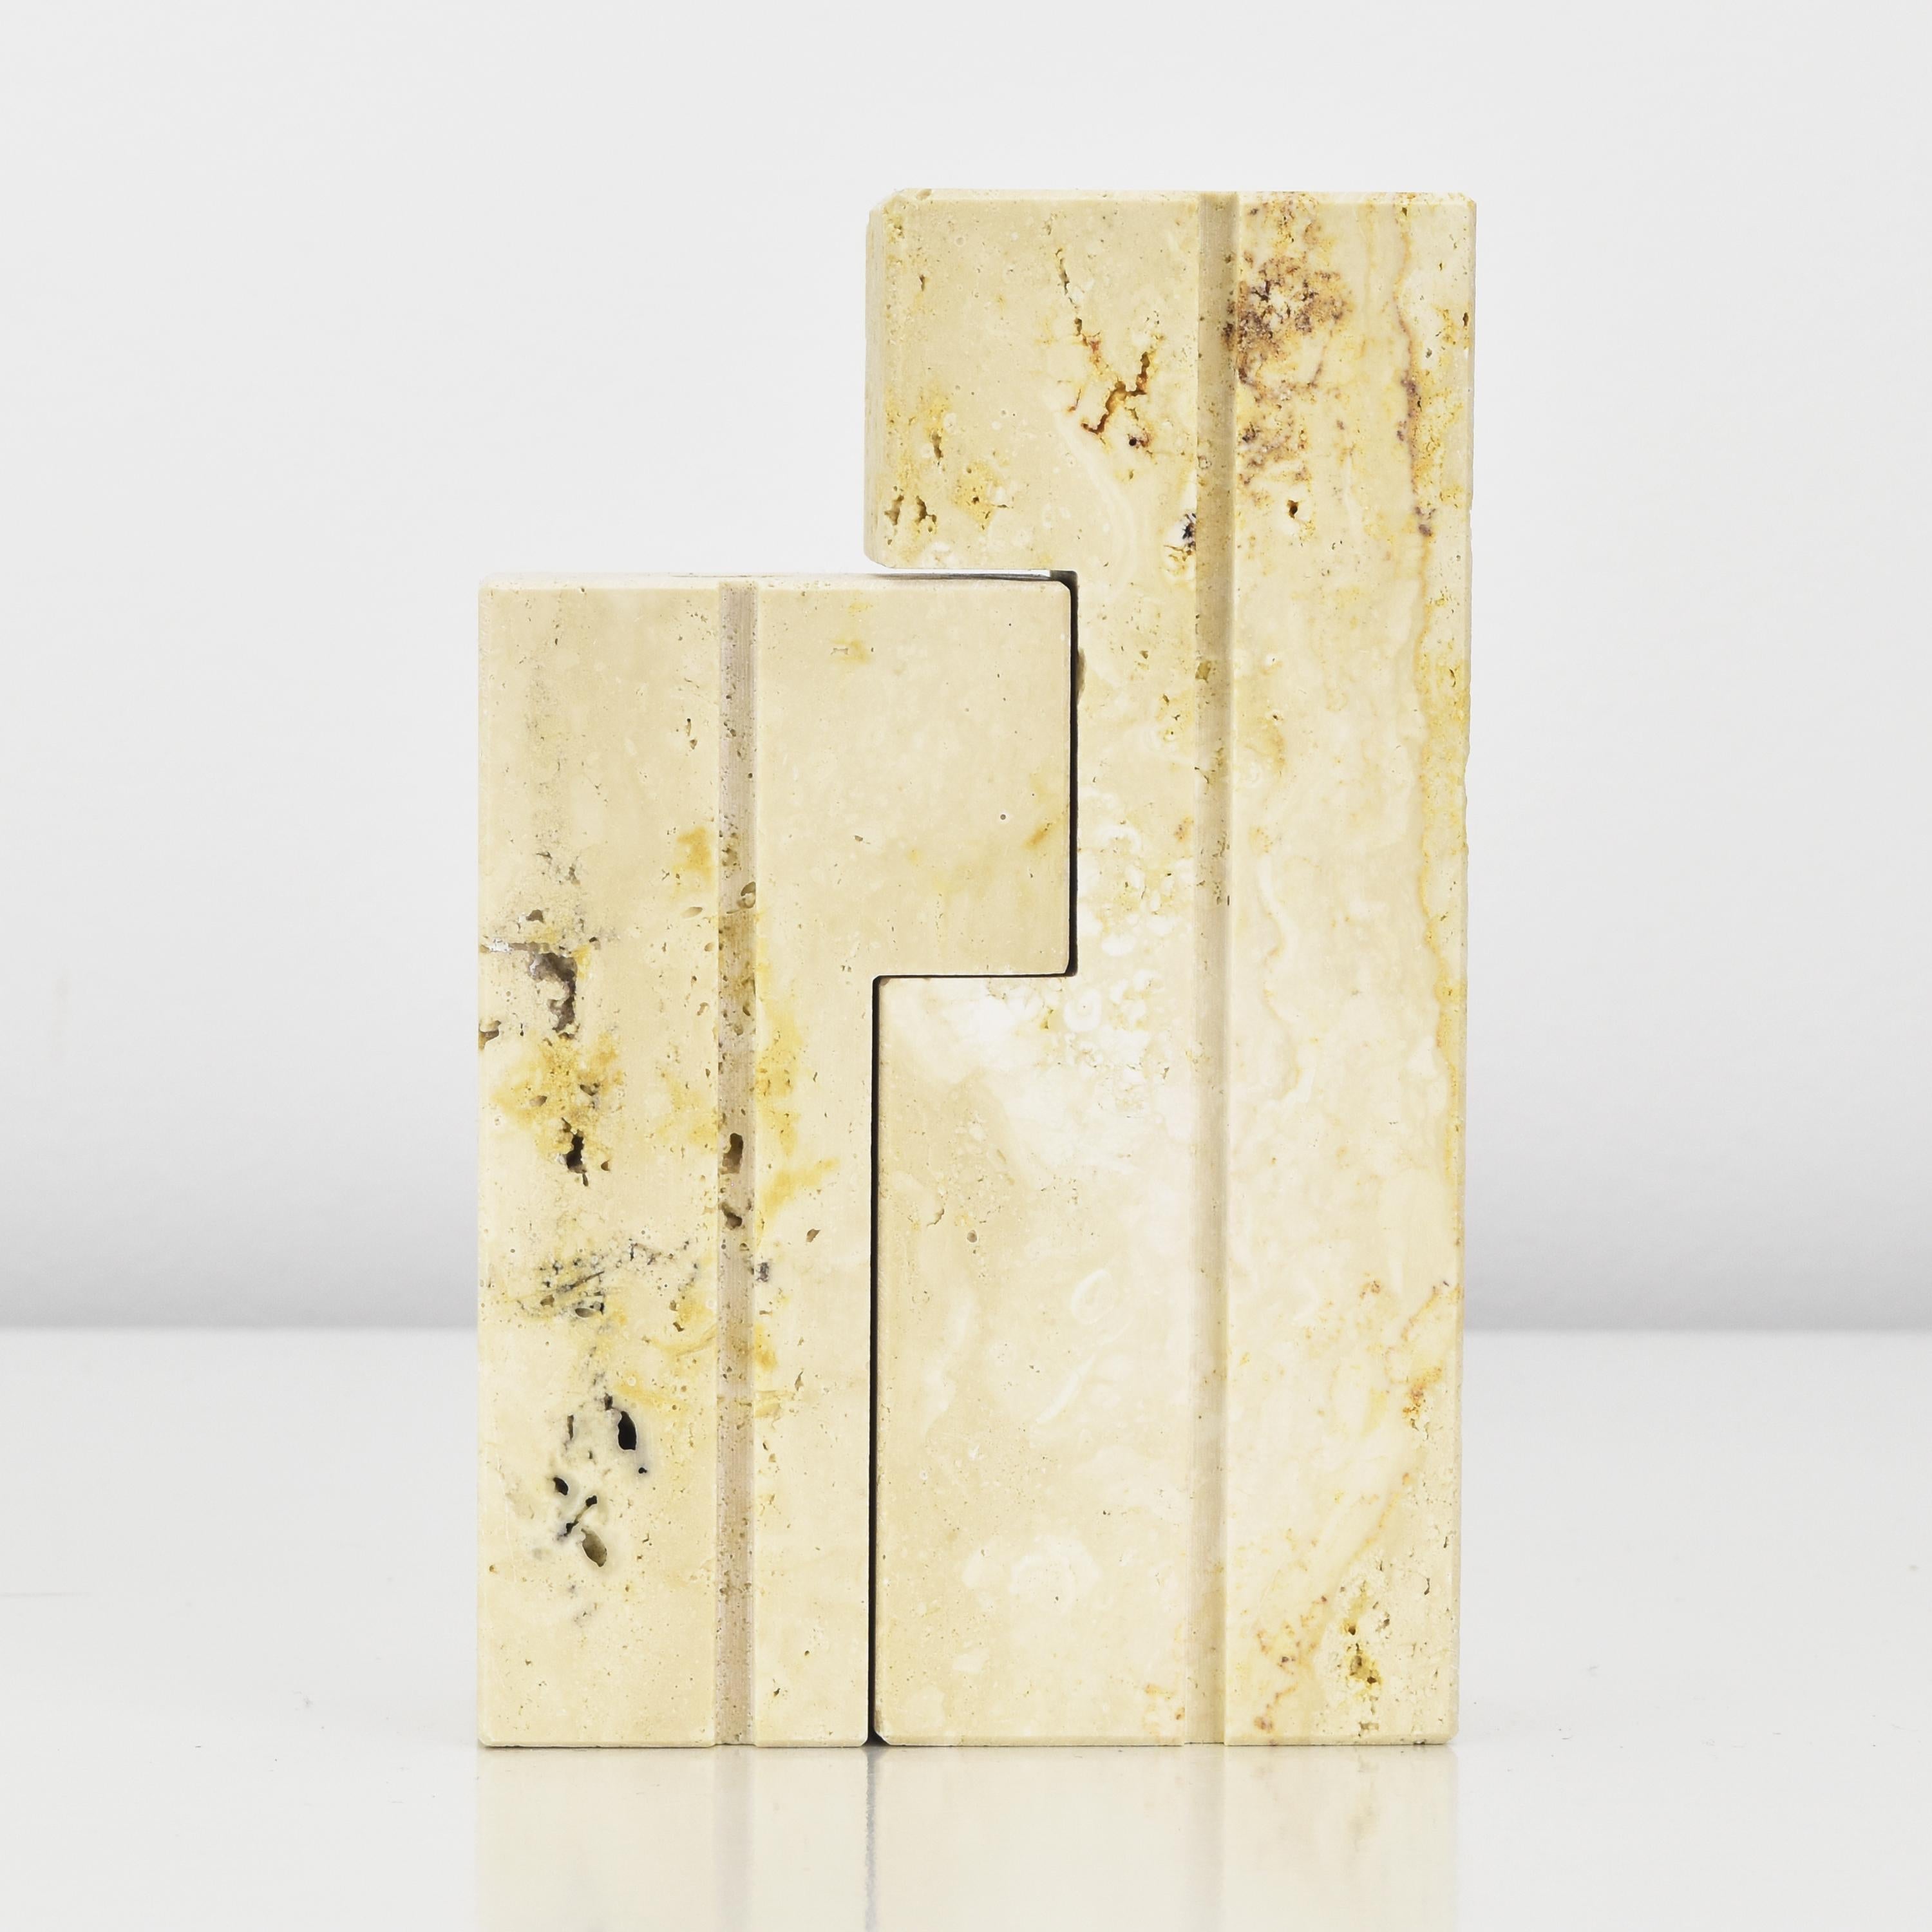 The vintage Fratelli Mannelli travertine nesting candle holders are exquisite examples of Italian craftsmanship and design. Fratelli Mannelli is a renowned Italian company known for its high-quality stone and marble products, and these nesting